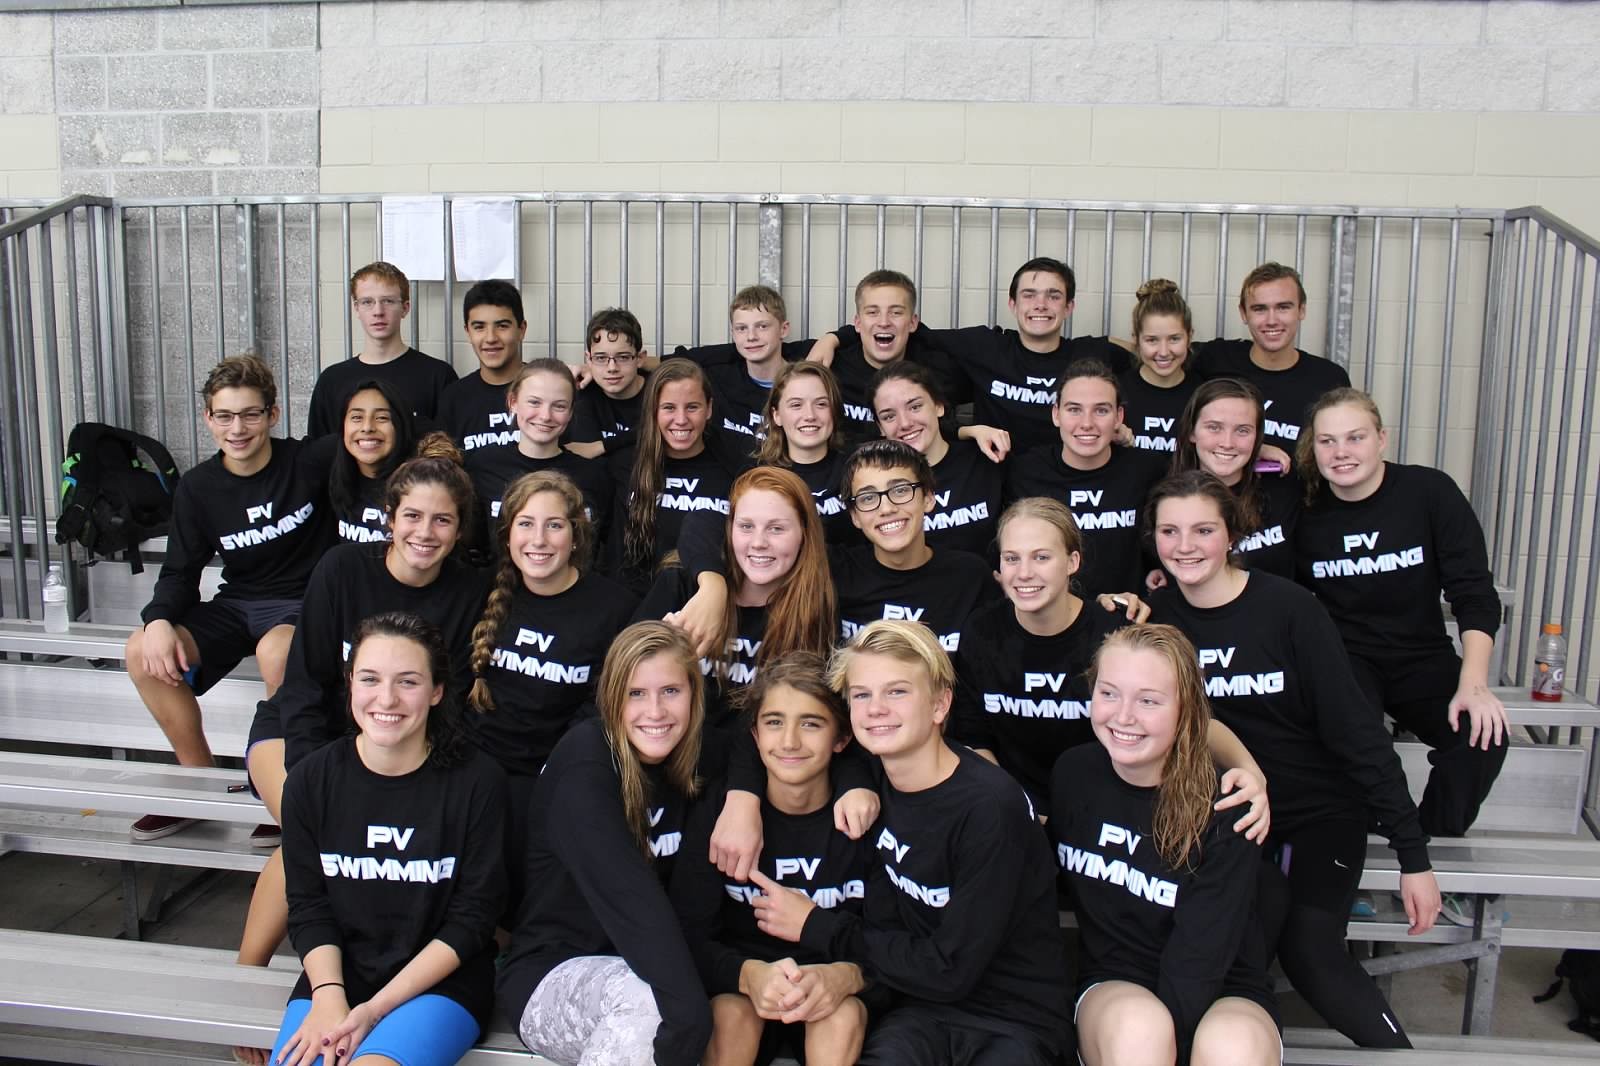 The Ponte Vedra High School Sharks Swim & Dive Team bested their district competition at the FHSAA District Championship Meet on Oct. 21 at Cecil Aquatics Center in Jacksonville.